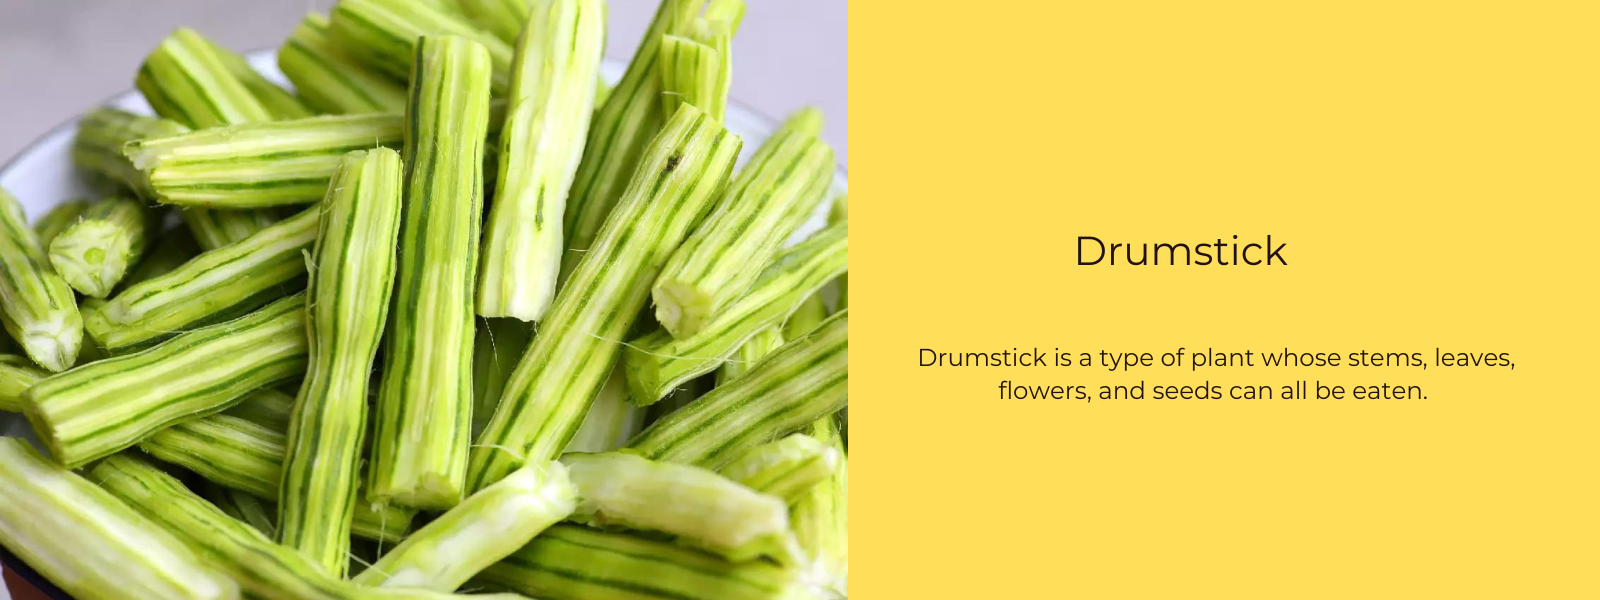 Drumstick – Health Benefits, Uses and Important Facts